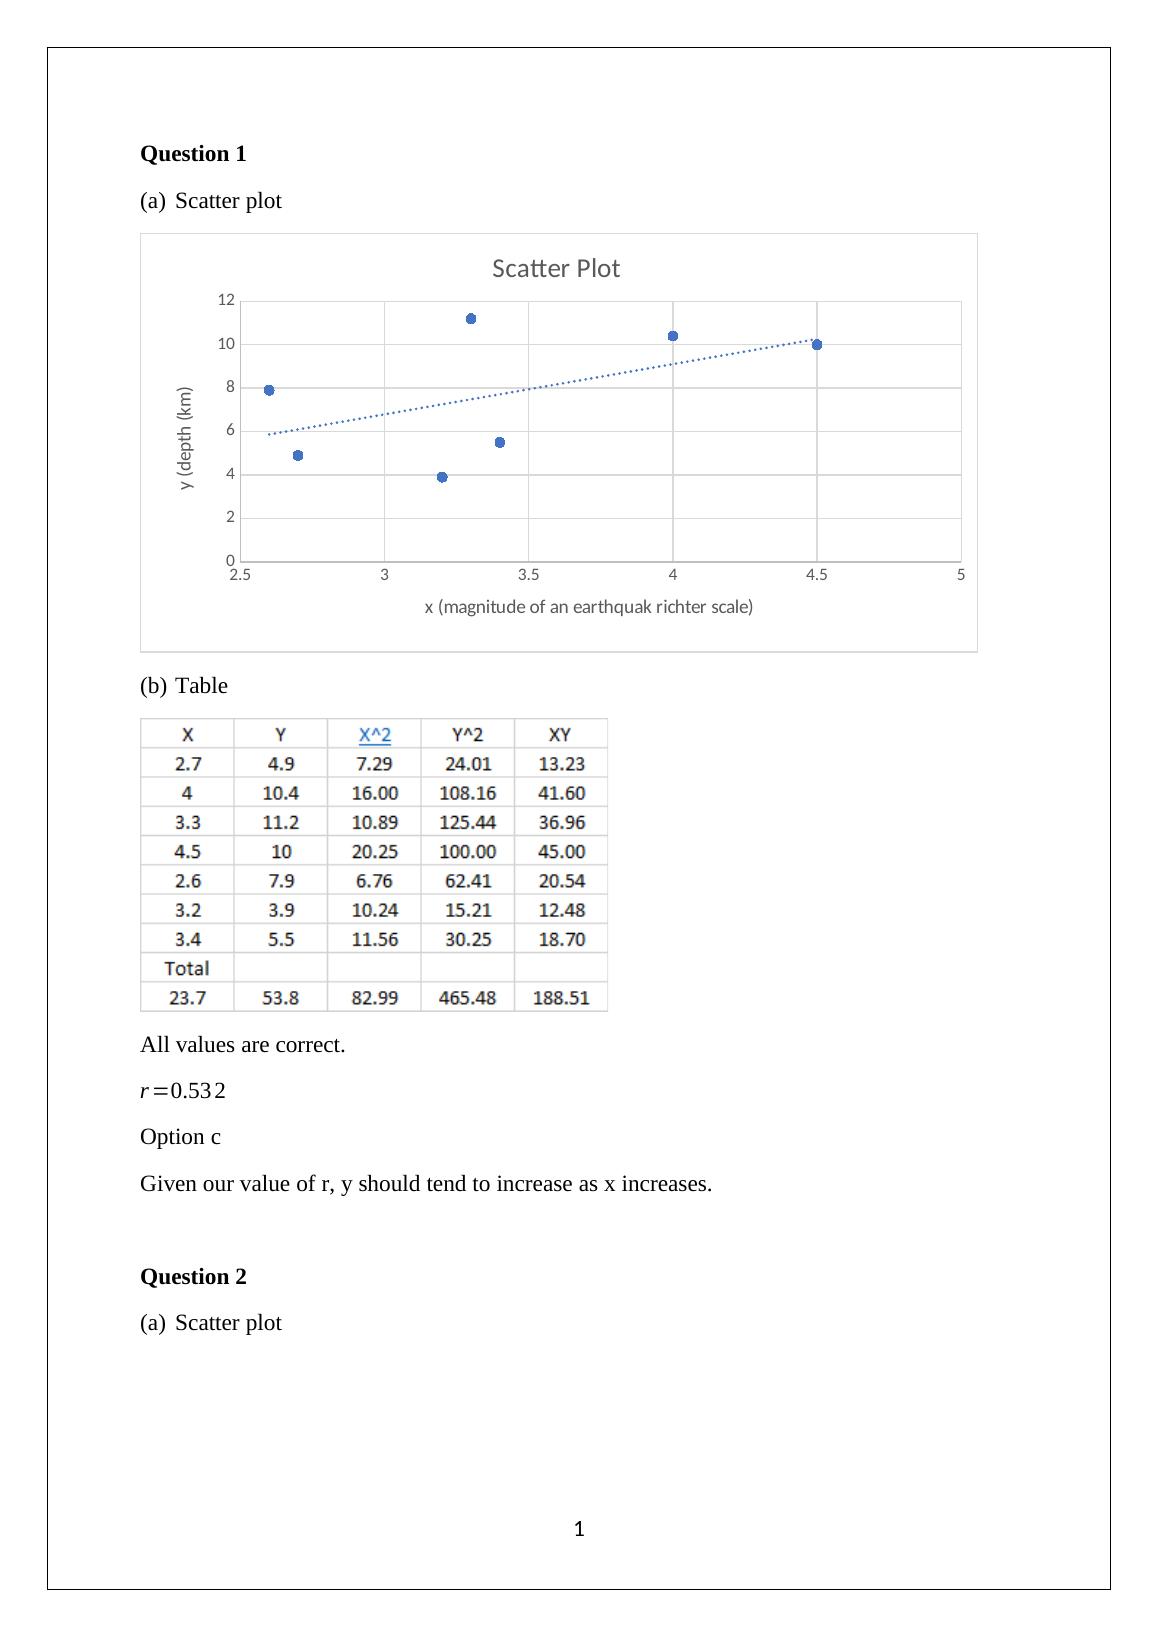 Scatter Plot and Table_1